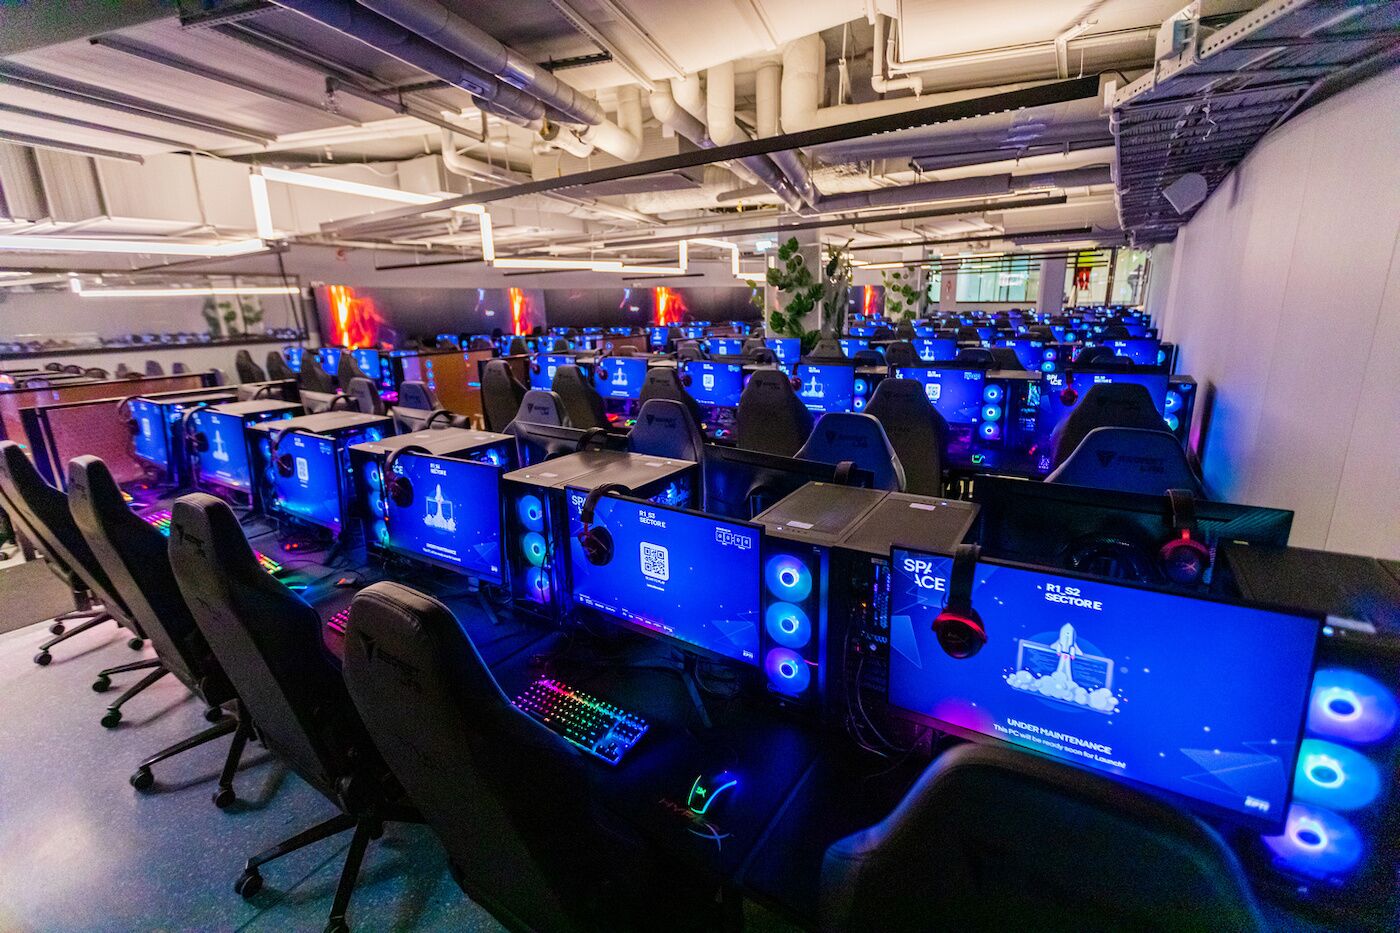 View of the computers and video game consoles at Space in Stockholm, the world's biggest gaming entertainment center